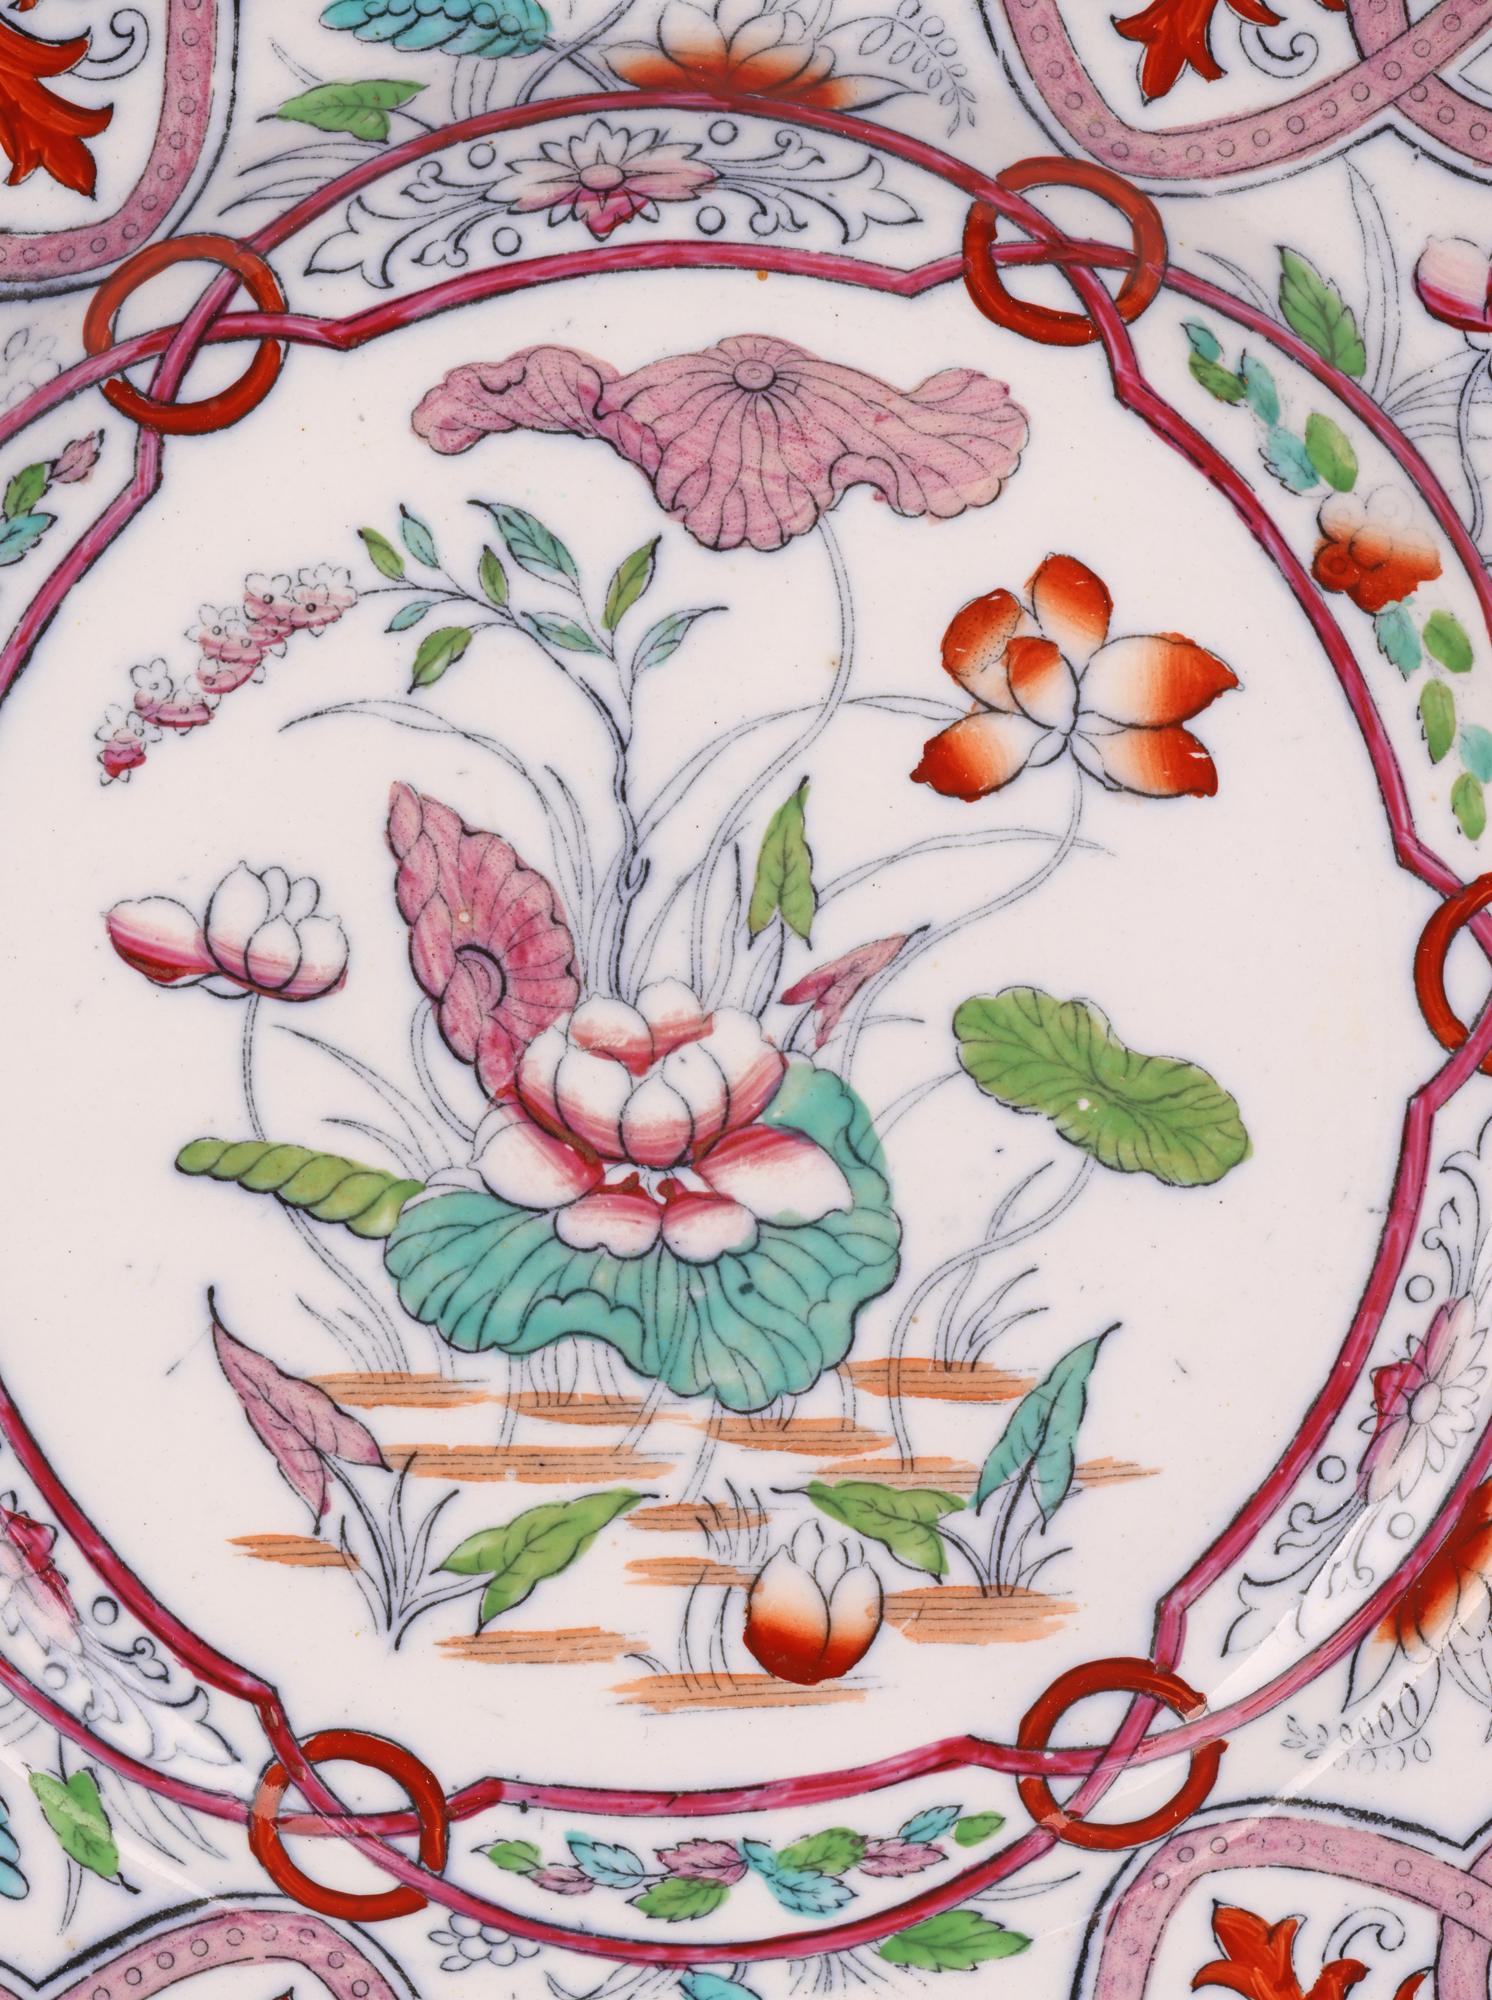 A stunning Aesthetic Movement William Brownfield plate with a stylised panel and floral design by Christopher Dresser (British, 1834-1904) dating from around 1876. 

Christopher Dresser was a renowned and influential designer born in Glasgow in